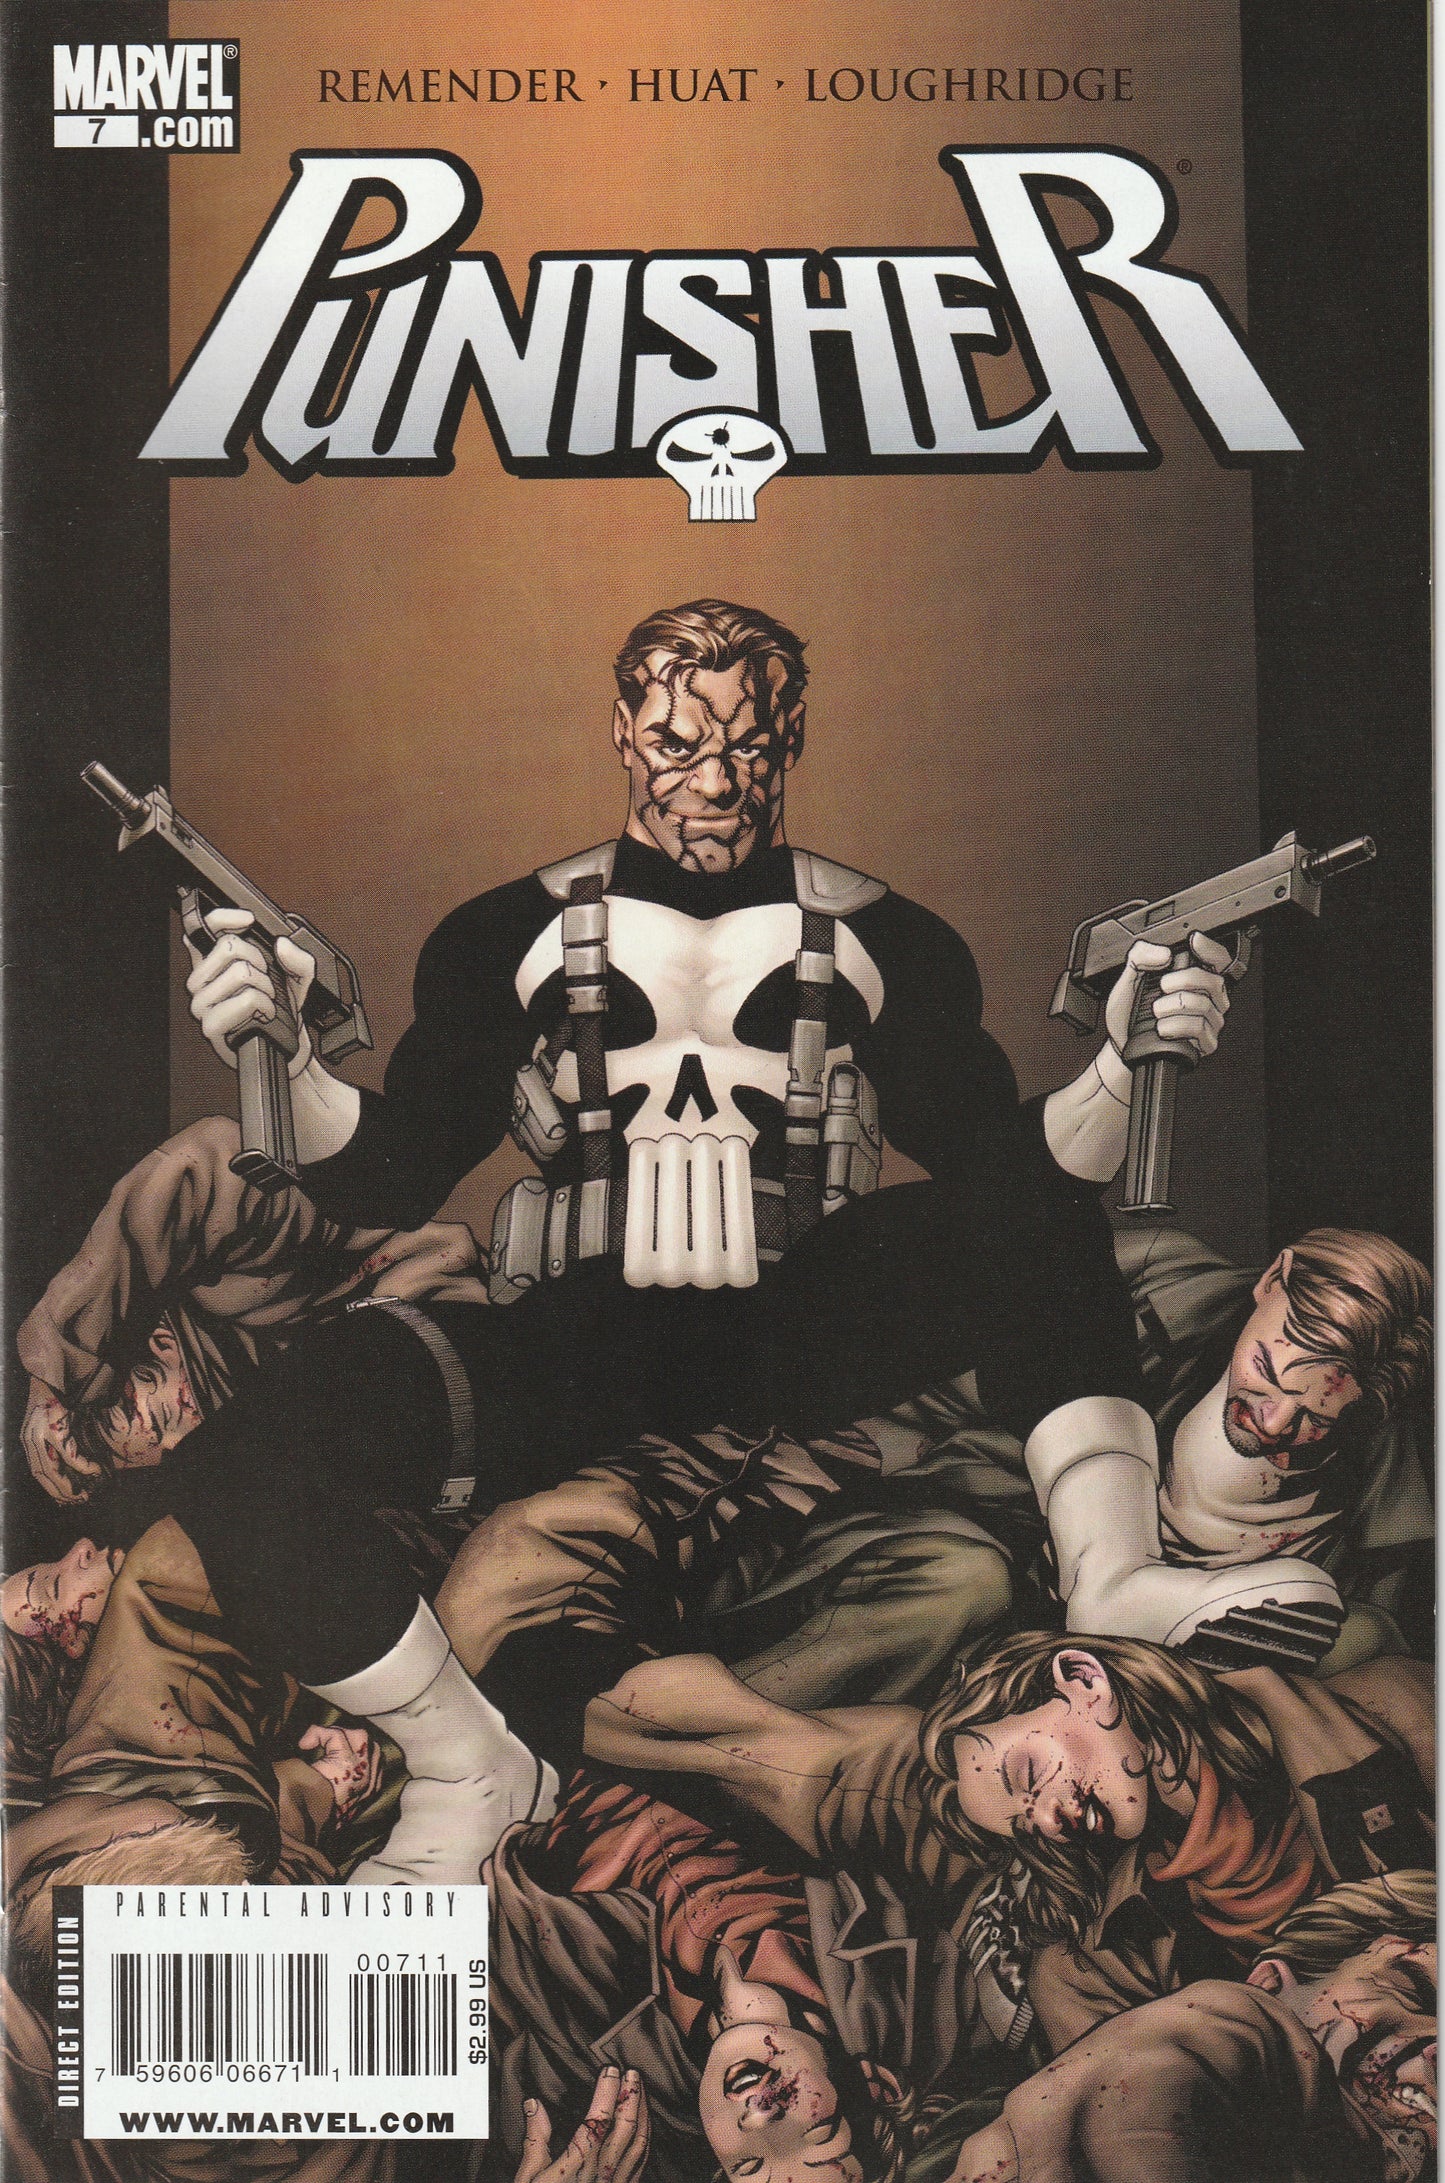 The Punisher #7 (Vol 8, 2009)